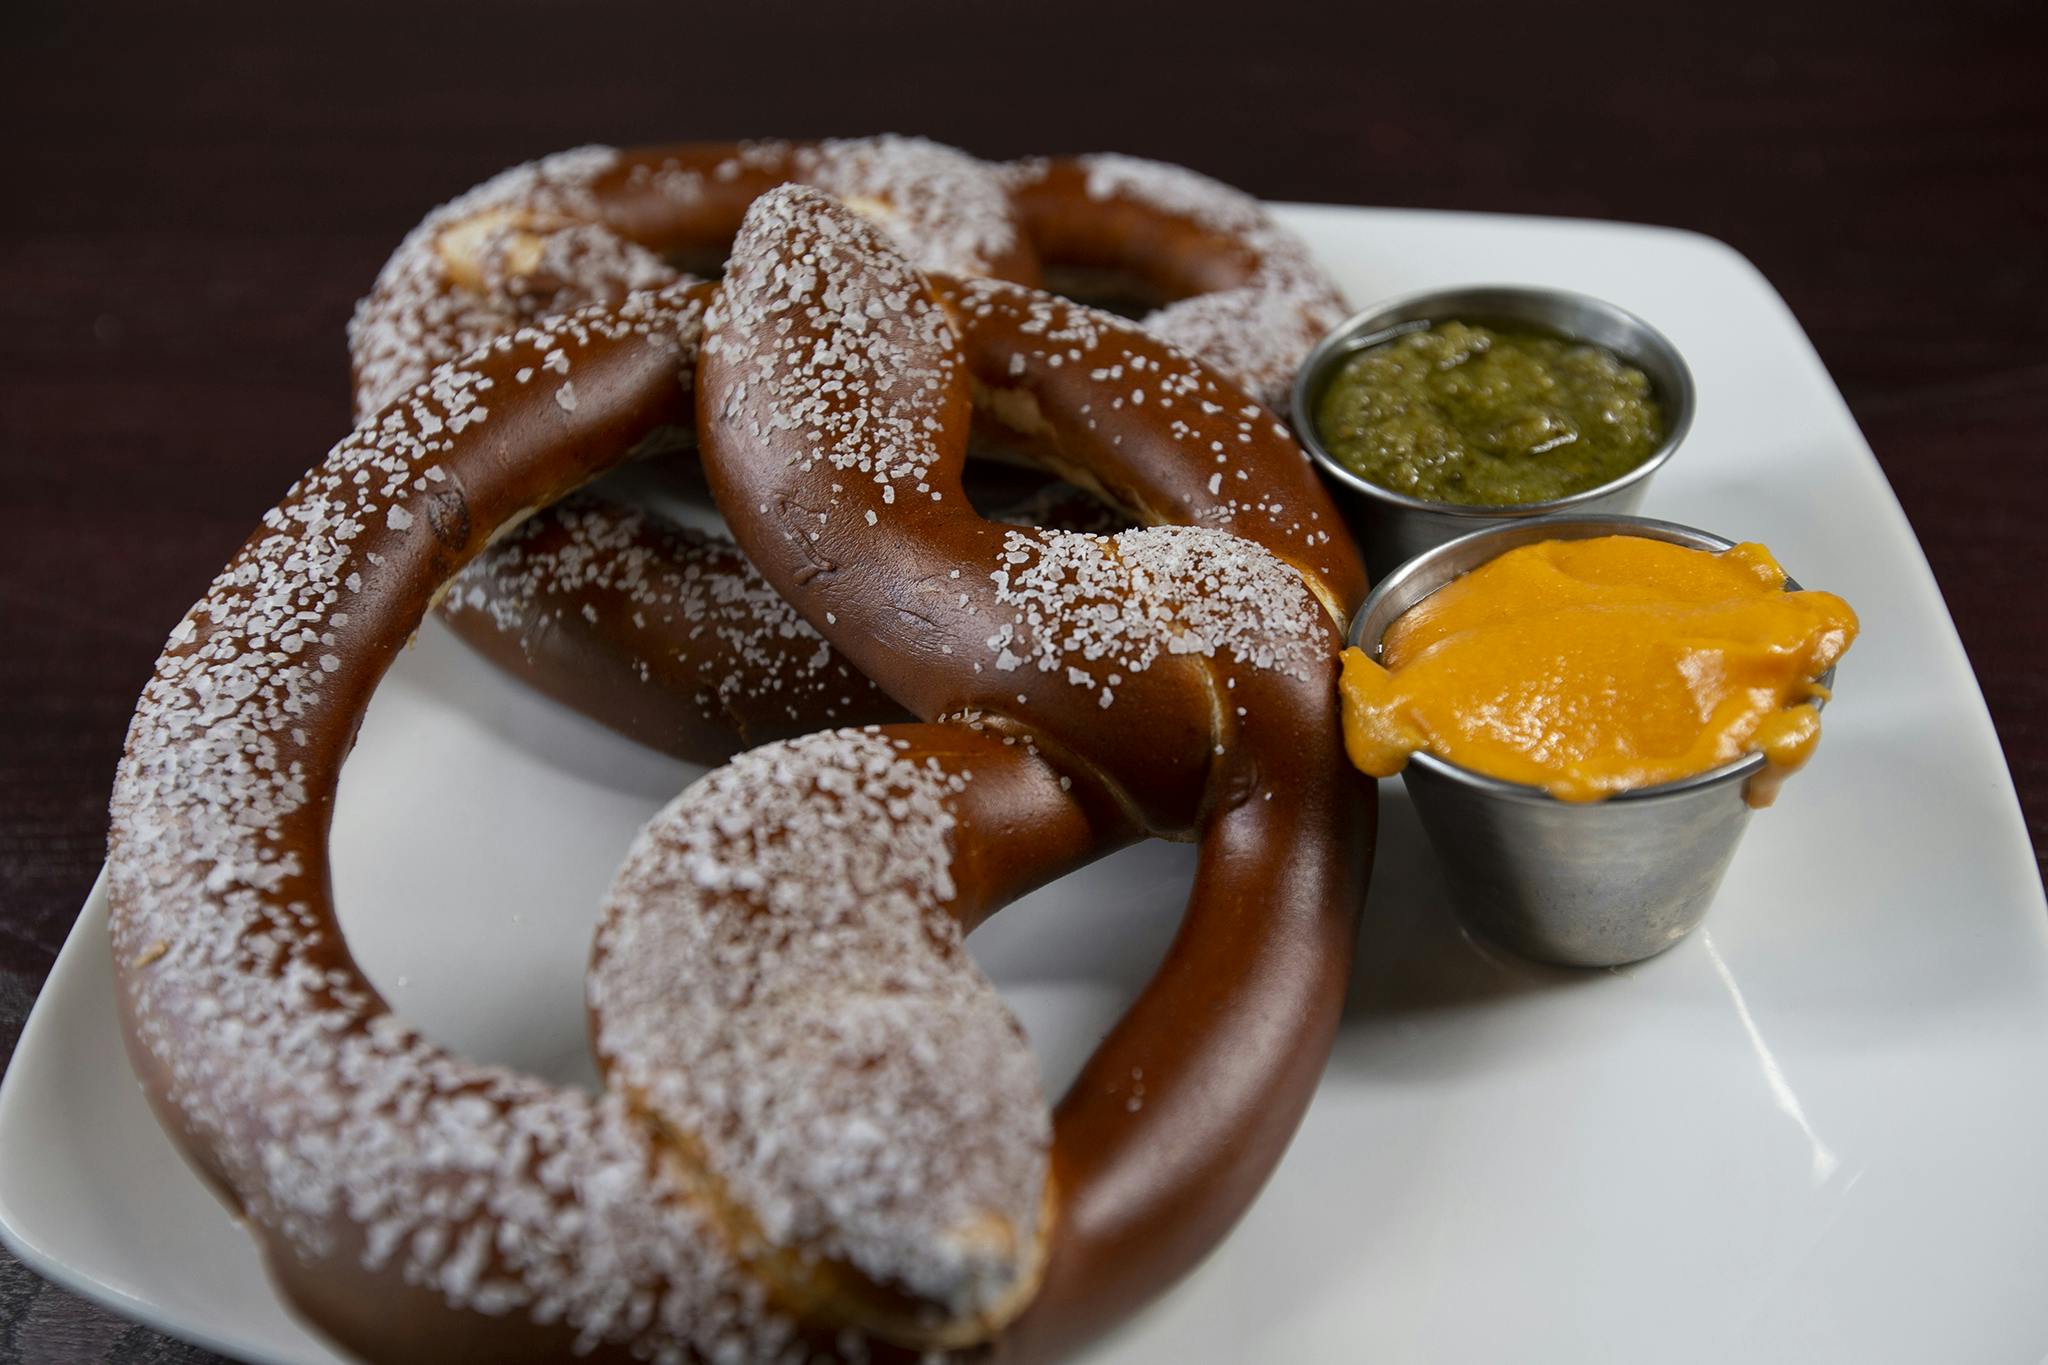 Soft Pretzel from Firehouse Grill - Chicago Ave in Evanston, IL